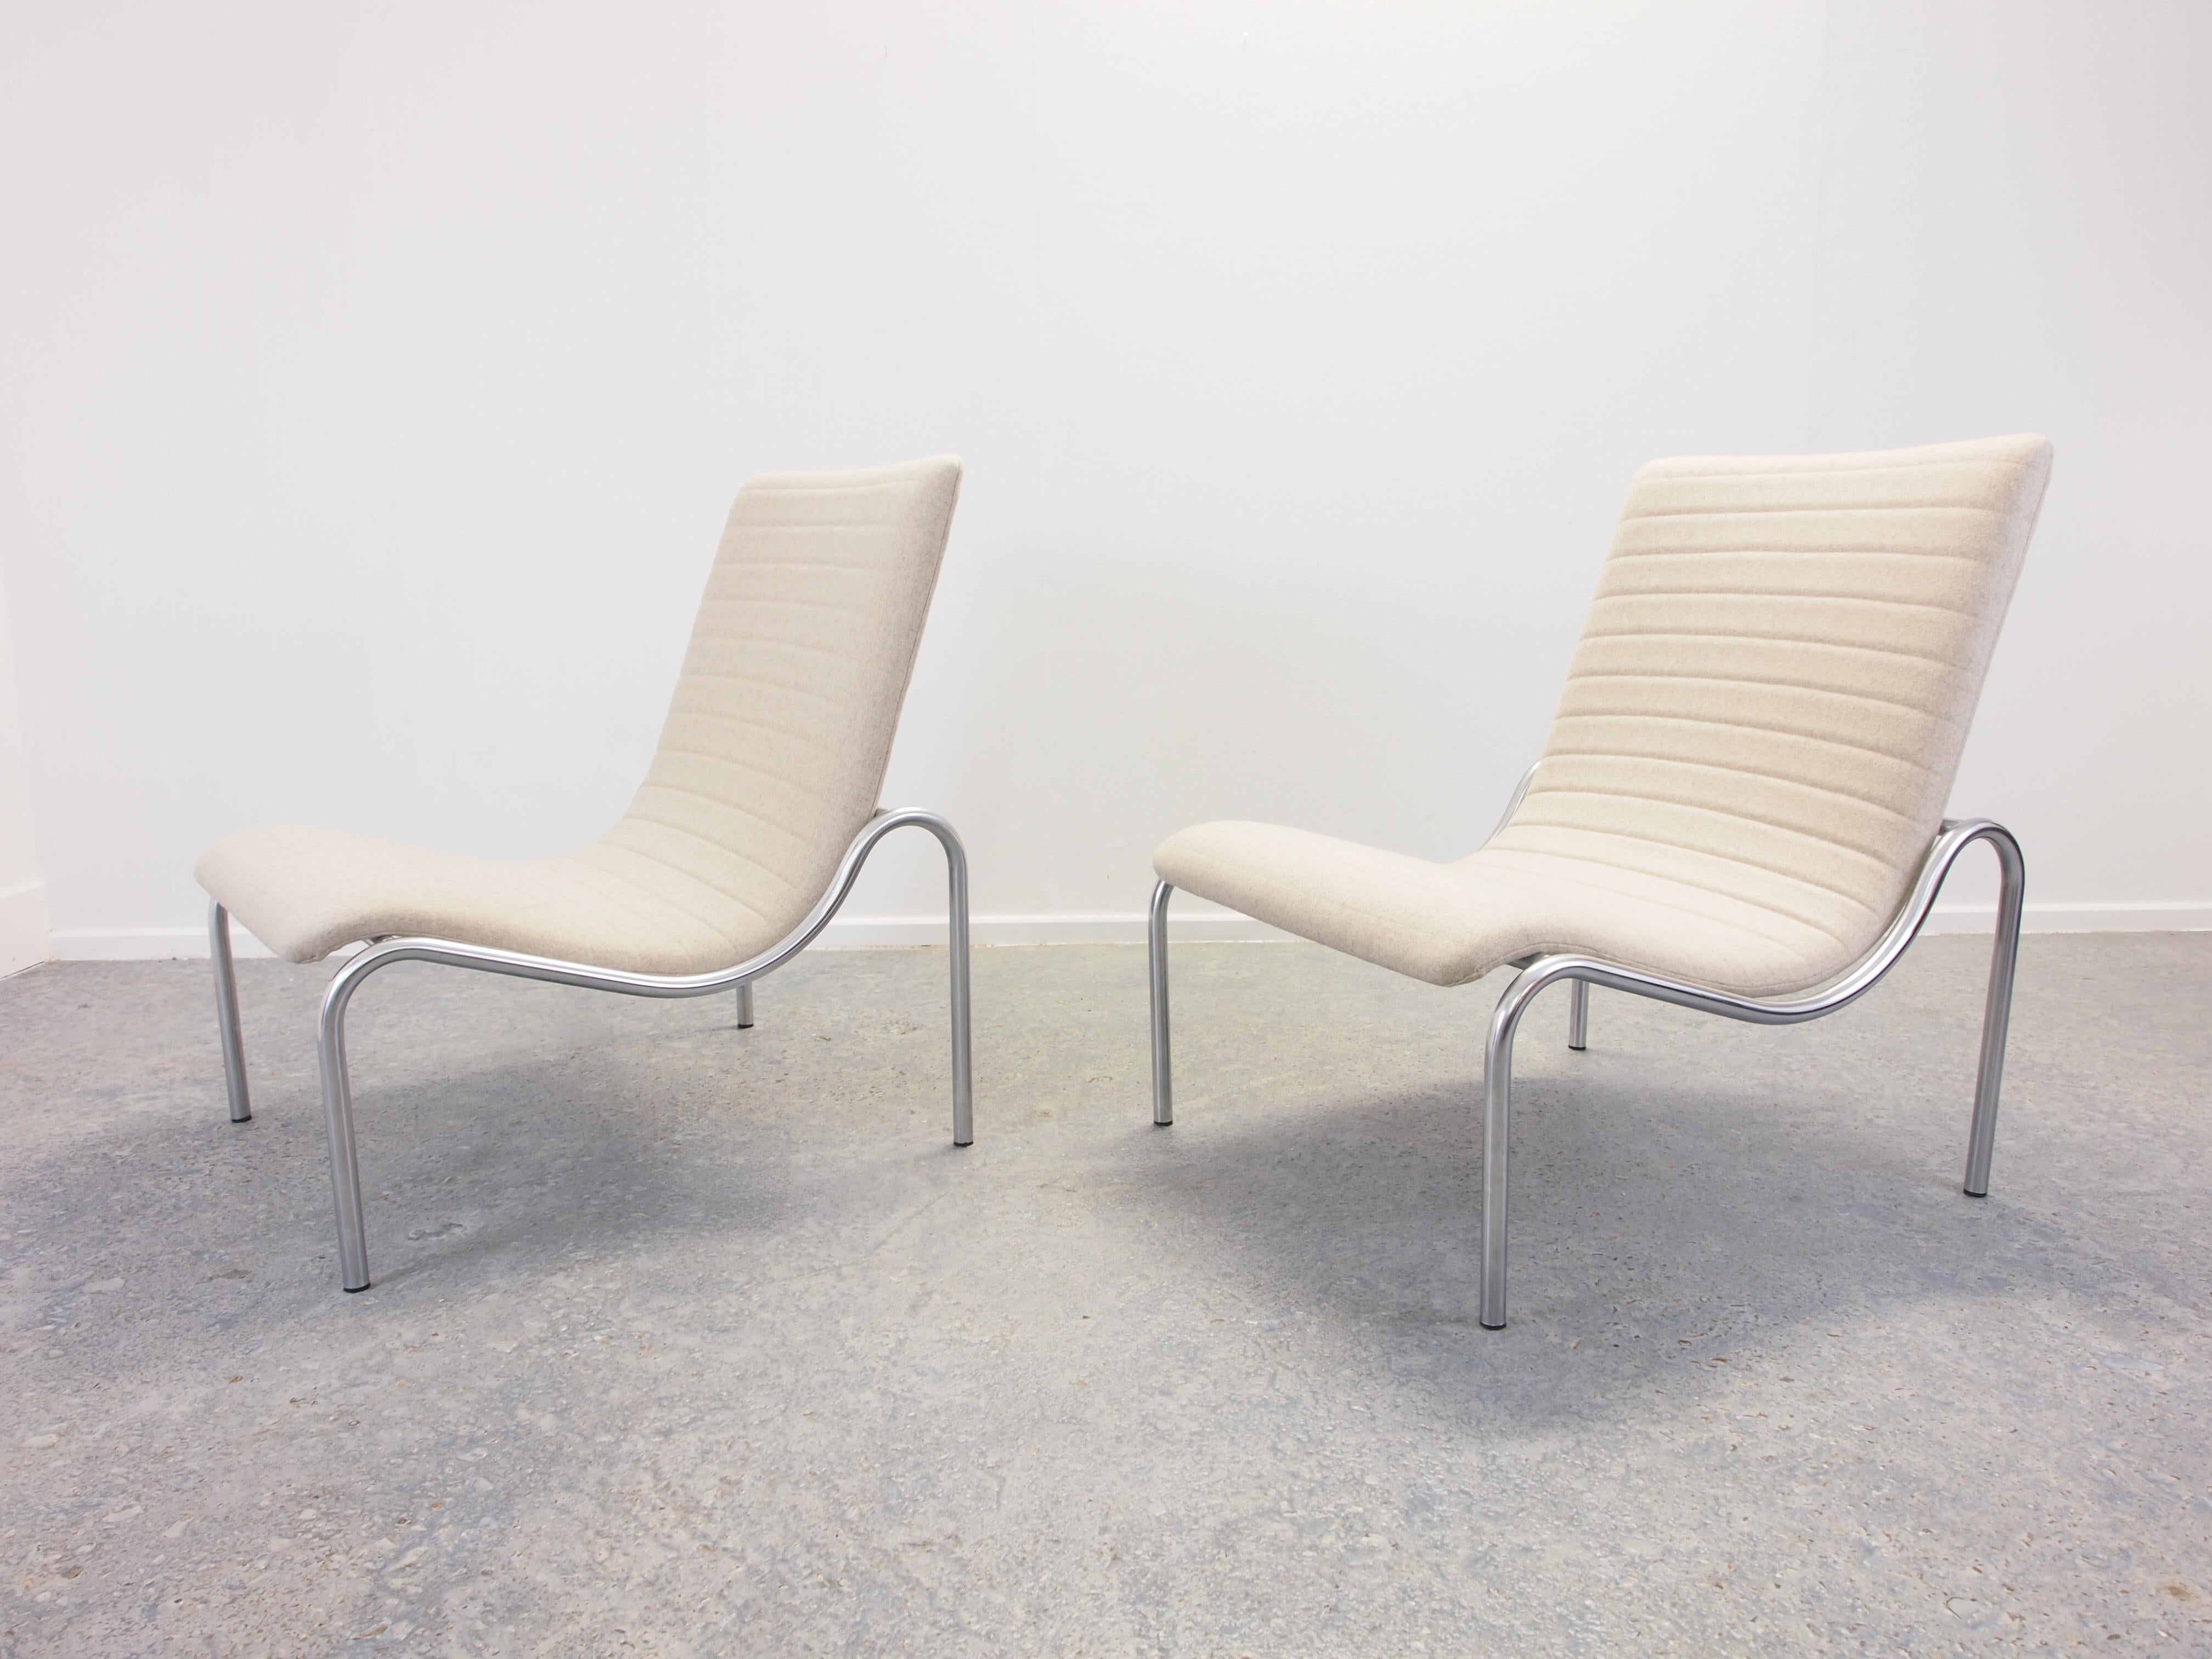 Amazing pair of 2 modernist Dutch Design lounge chairs by one of the most prominent after W.O. II Dutch Industrial designers Kho Liang Le.
These loungers are made by Stabin (Woerden).

Condition: In good vintage condition with traces of usage on